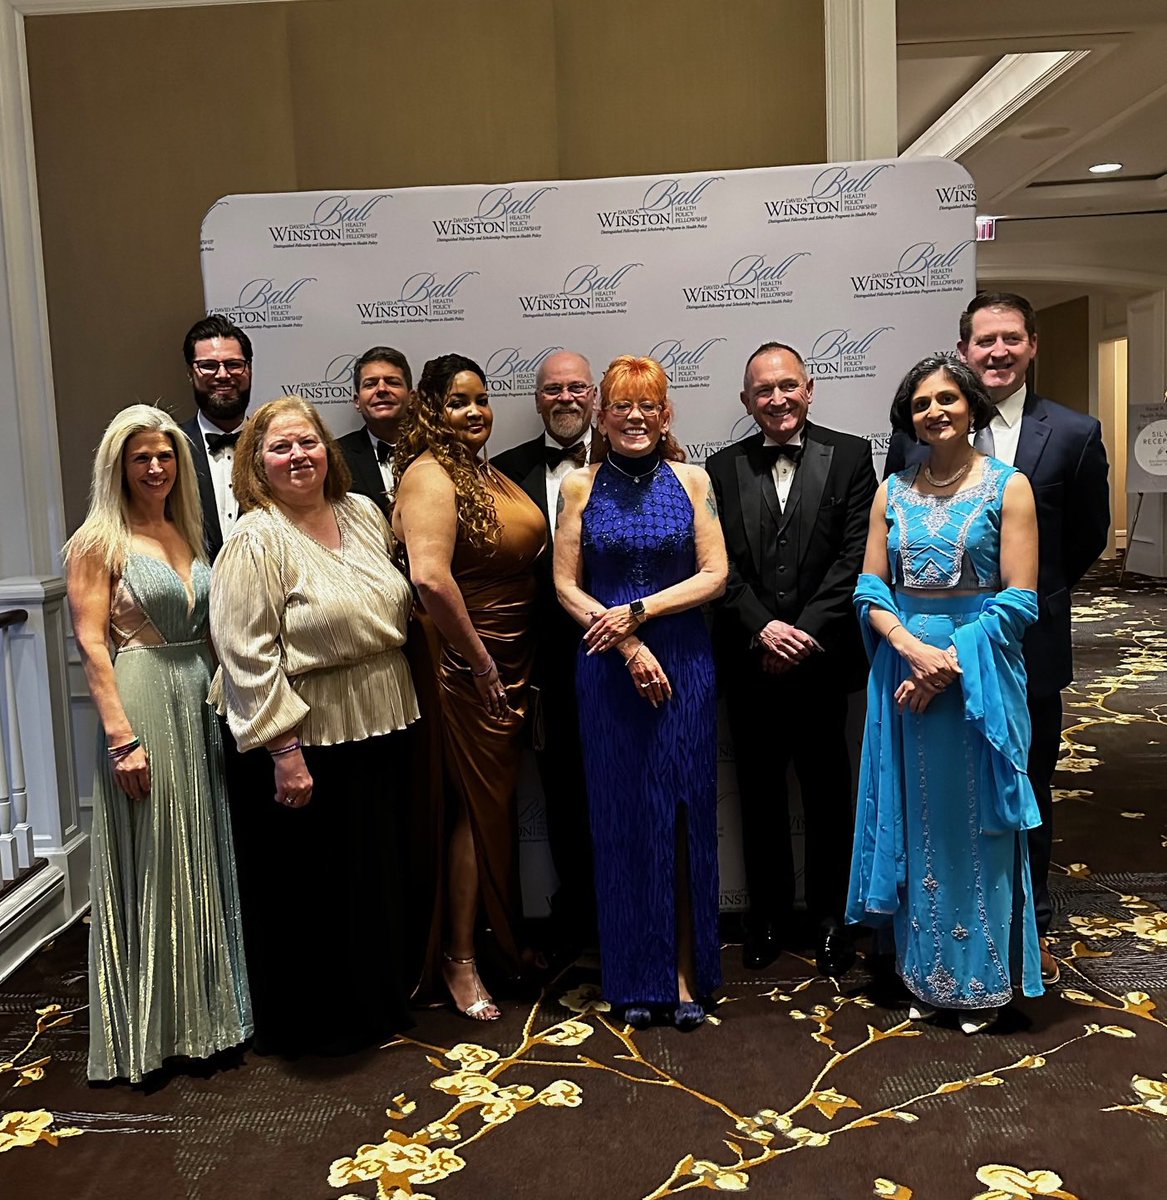 #LADAorg was thrilled to sponsor the 39th Annual Health Policy Ball to support #healthpolicy fellows. The event was filled with opportunities to network with various health policy stakeholders while enjoying time with colleagues. #HealthProm24 #patientvoice @Dave_Arntsen